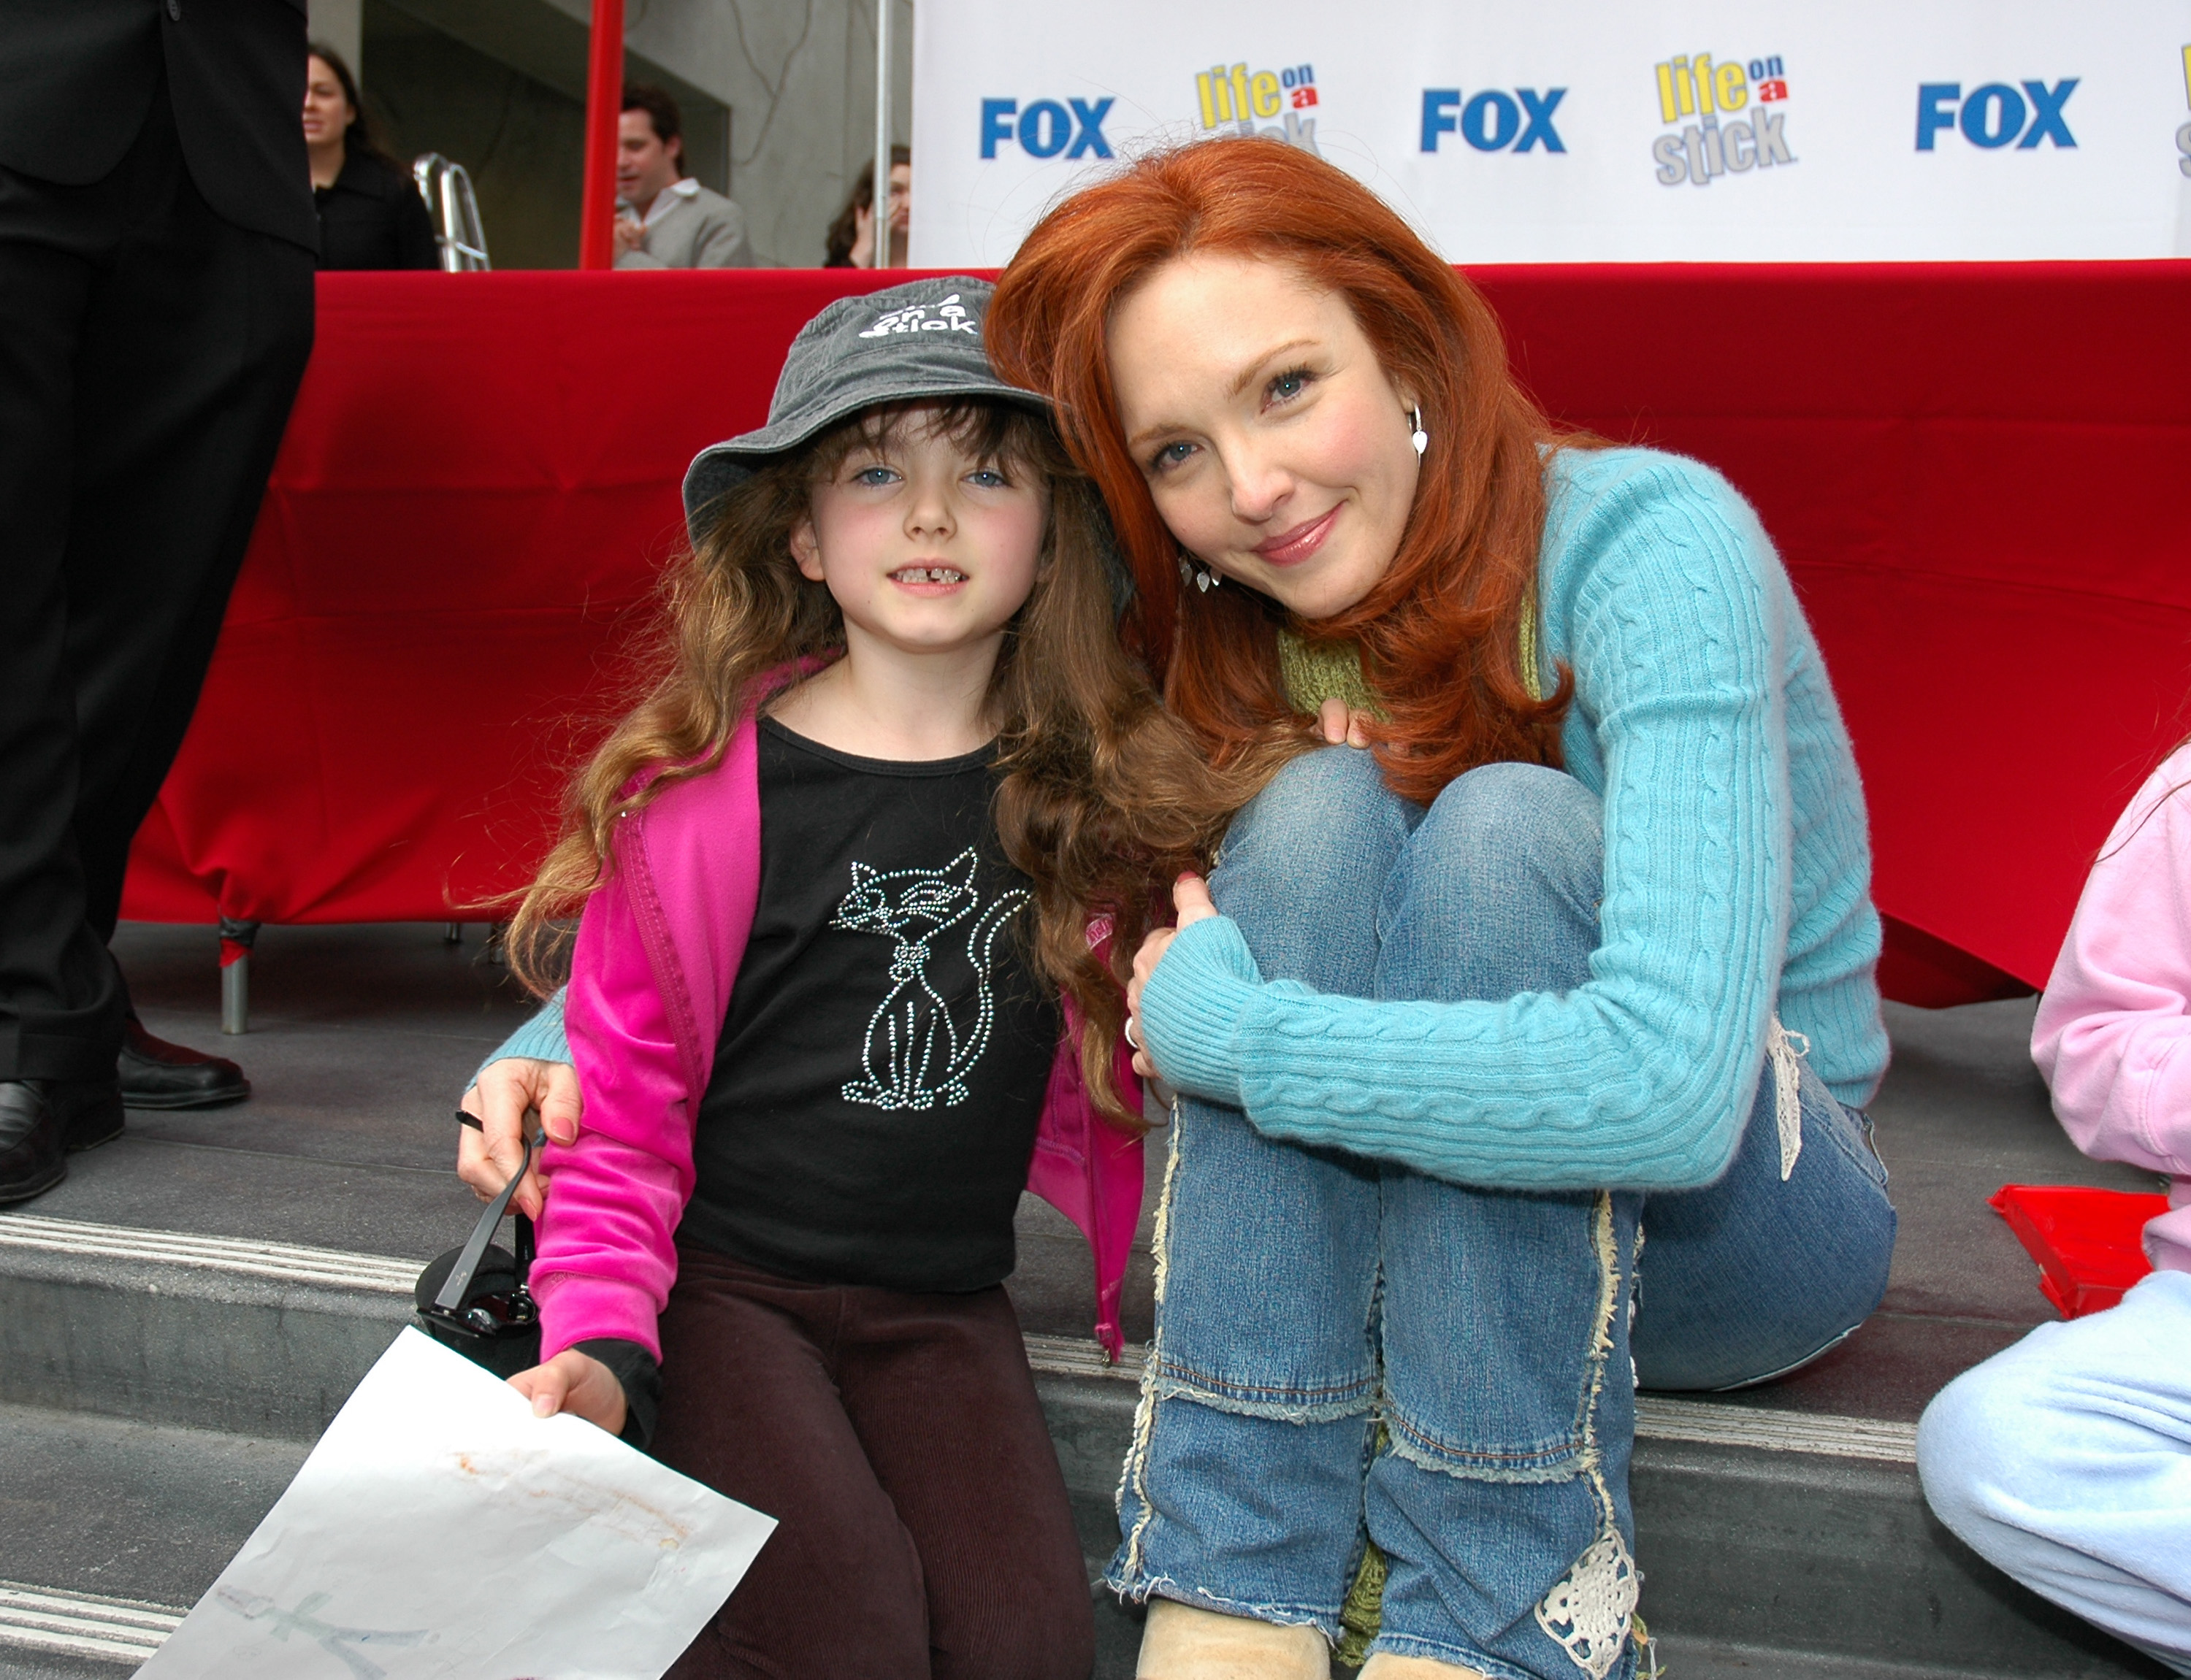 Amy Yasbeck and Stella Ritter during "Life on a Stick" - Veggie Dog Eating Contest in Hollywood, California on March 23, 2005 | Source: Getty Images